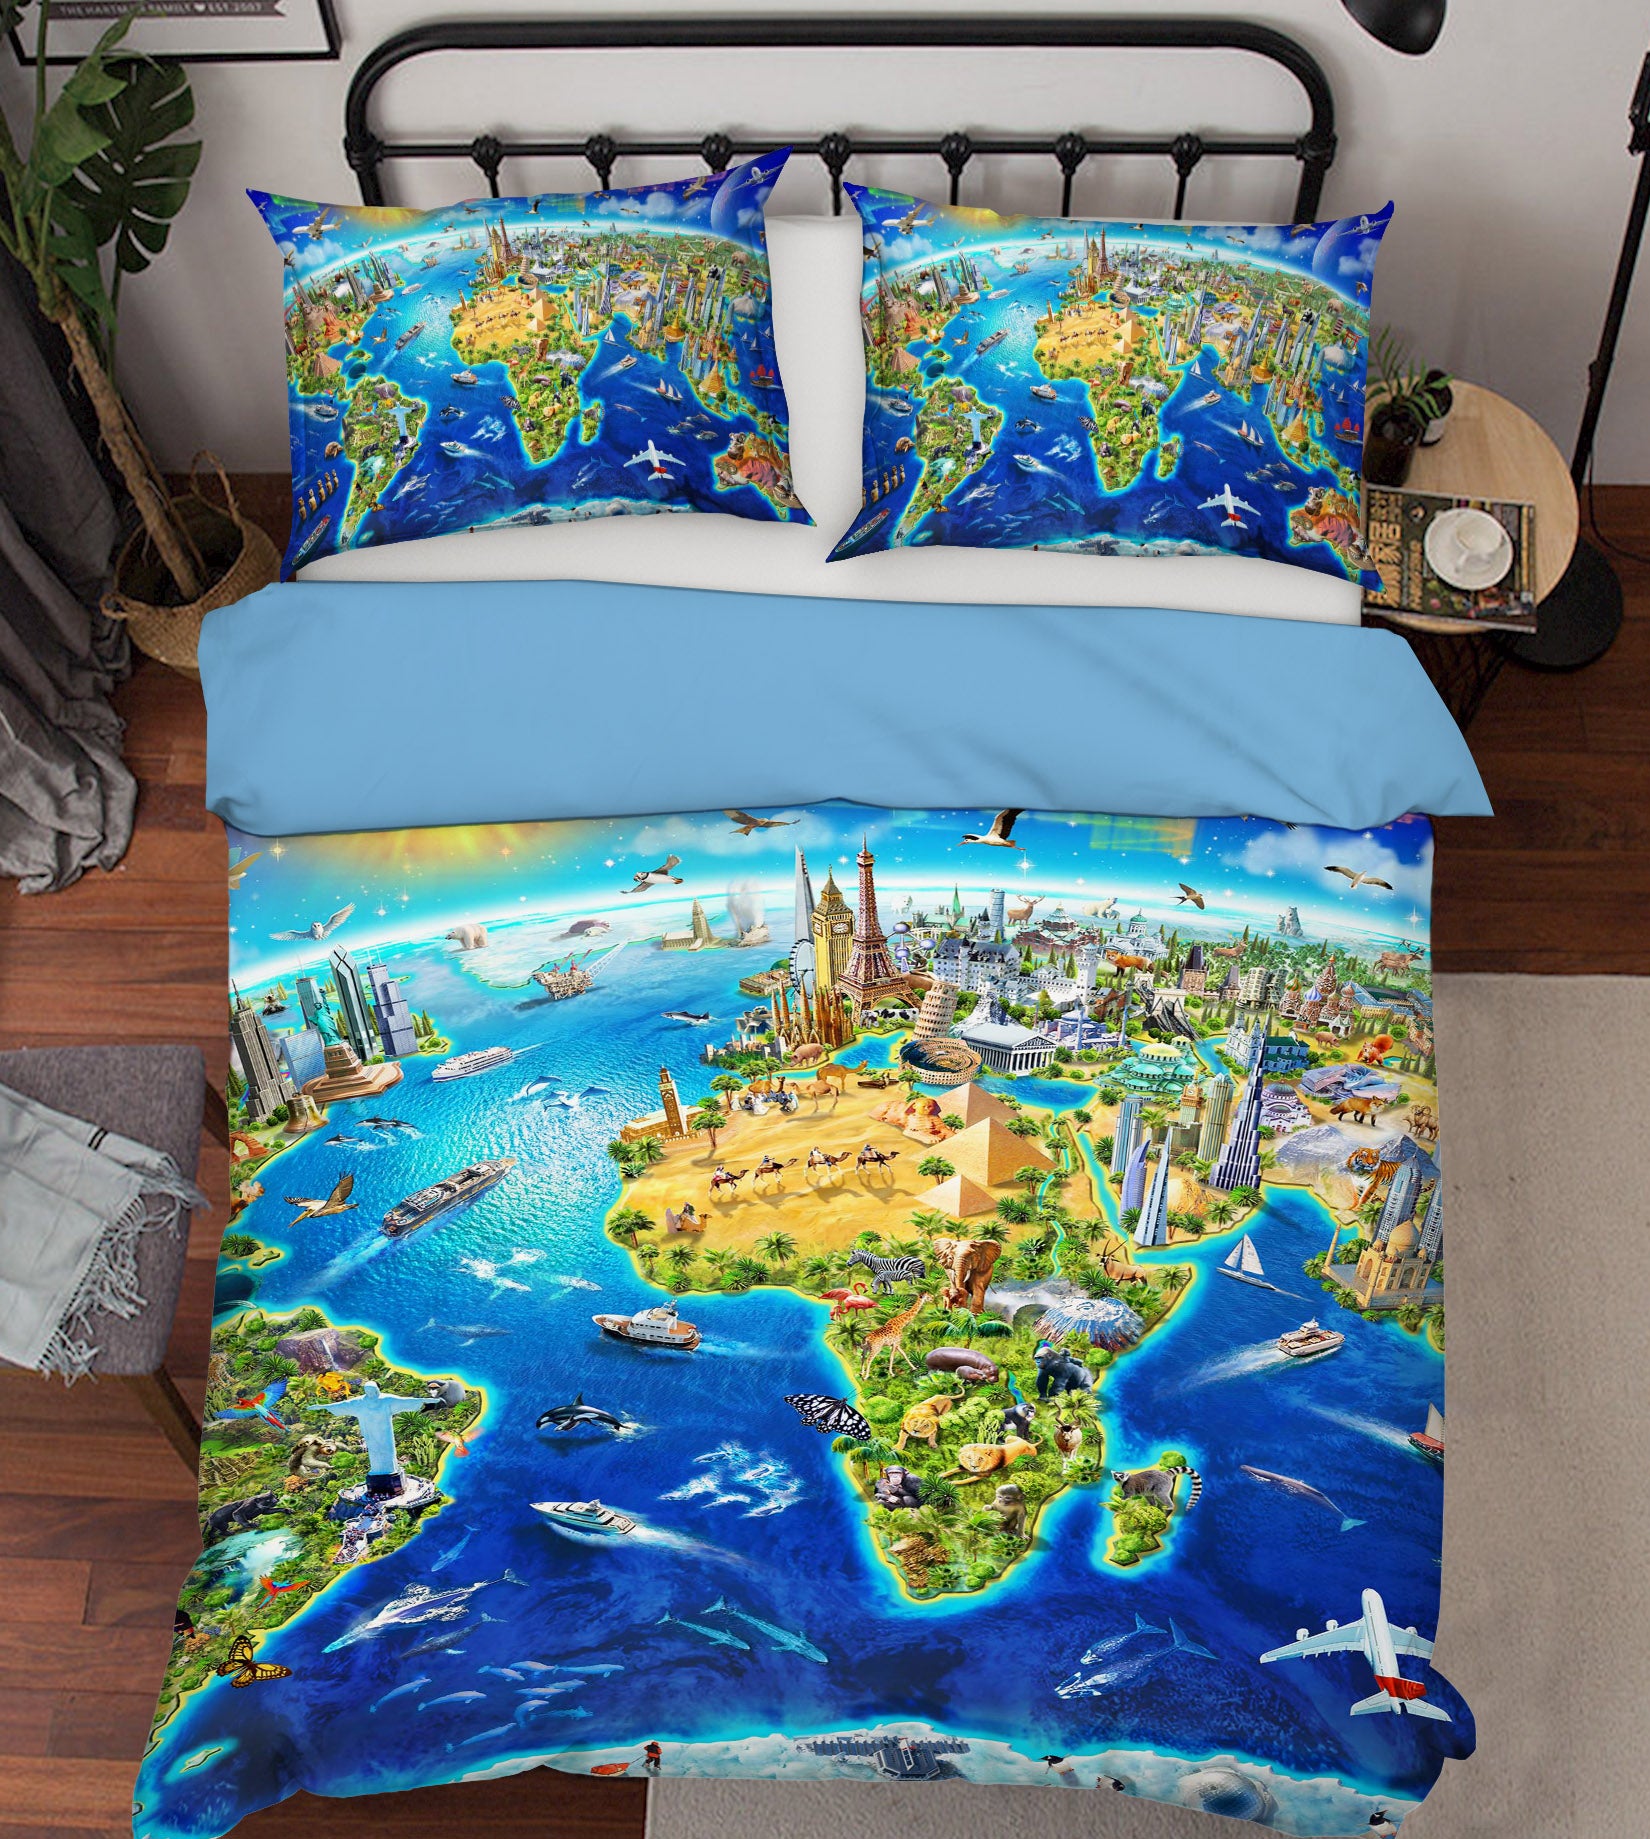 3D Earth Oasis 2126 Adrian Chesterman Bedding Bed Pillowcases Quilt